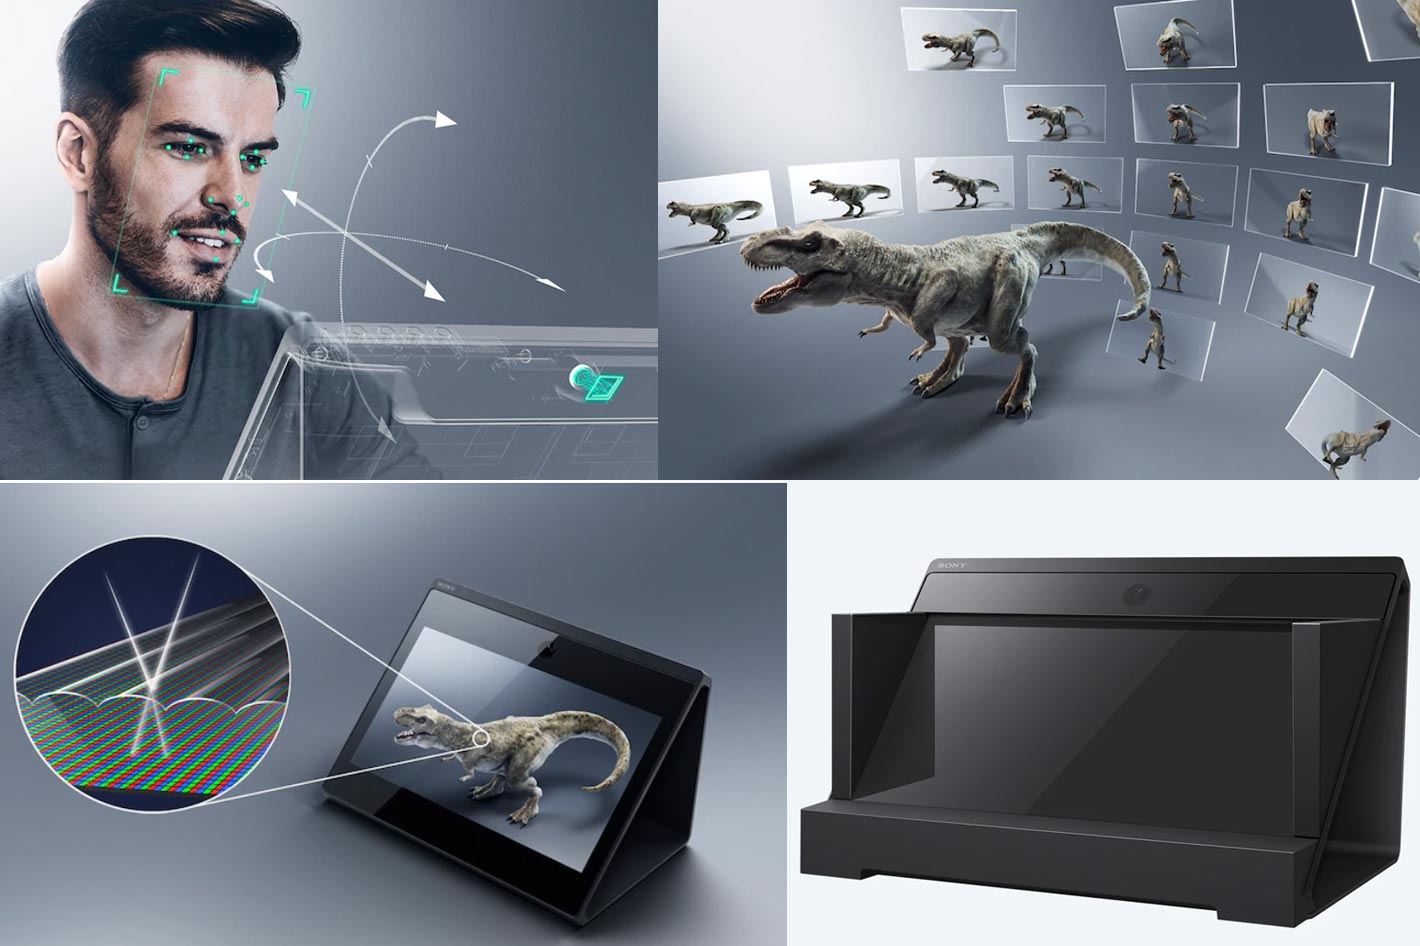 Sony Spatial Reality Display: 3D without glasses for creatives